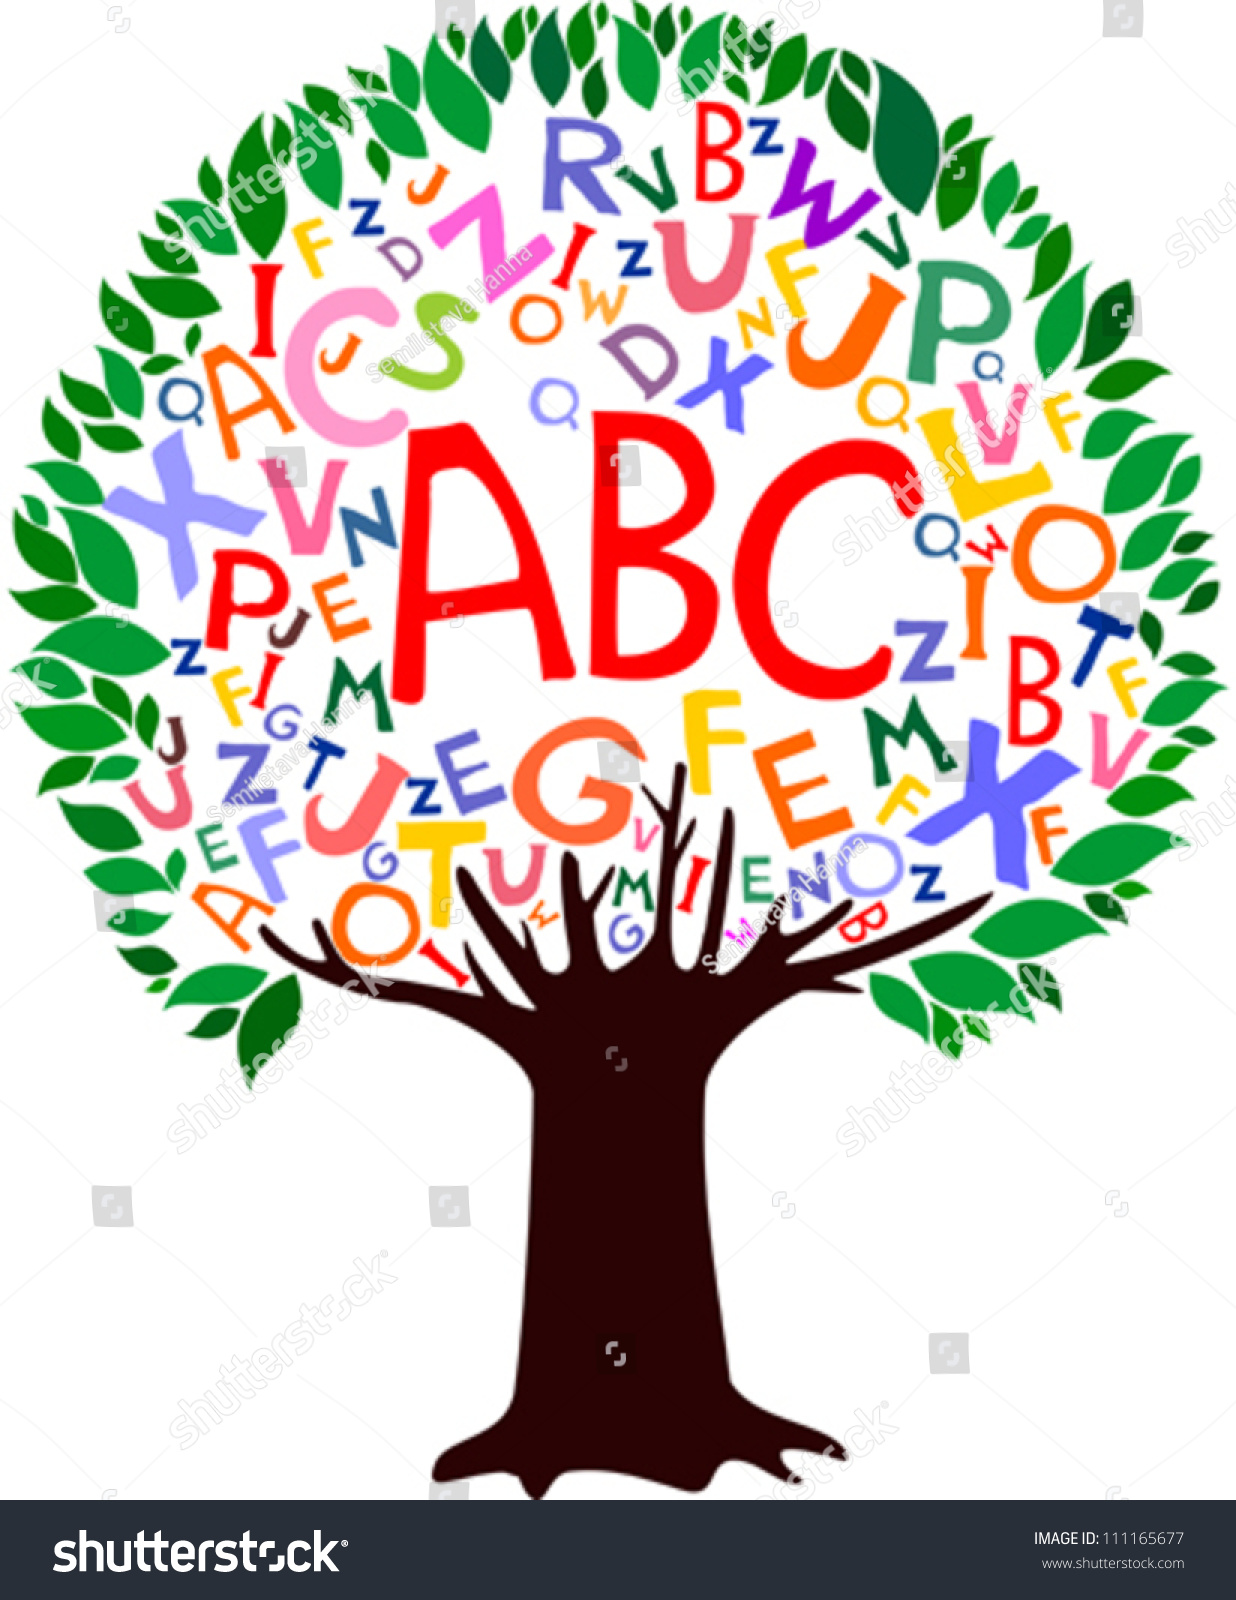 Abstract Tree Colorful Letters Isolated On Stock Vector 111165677 ...